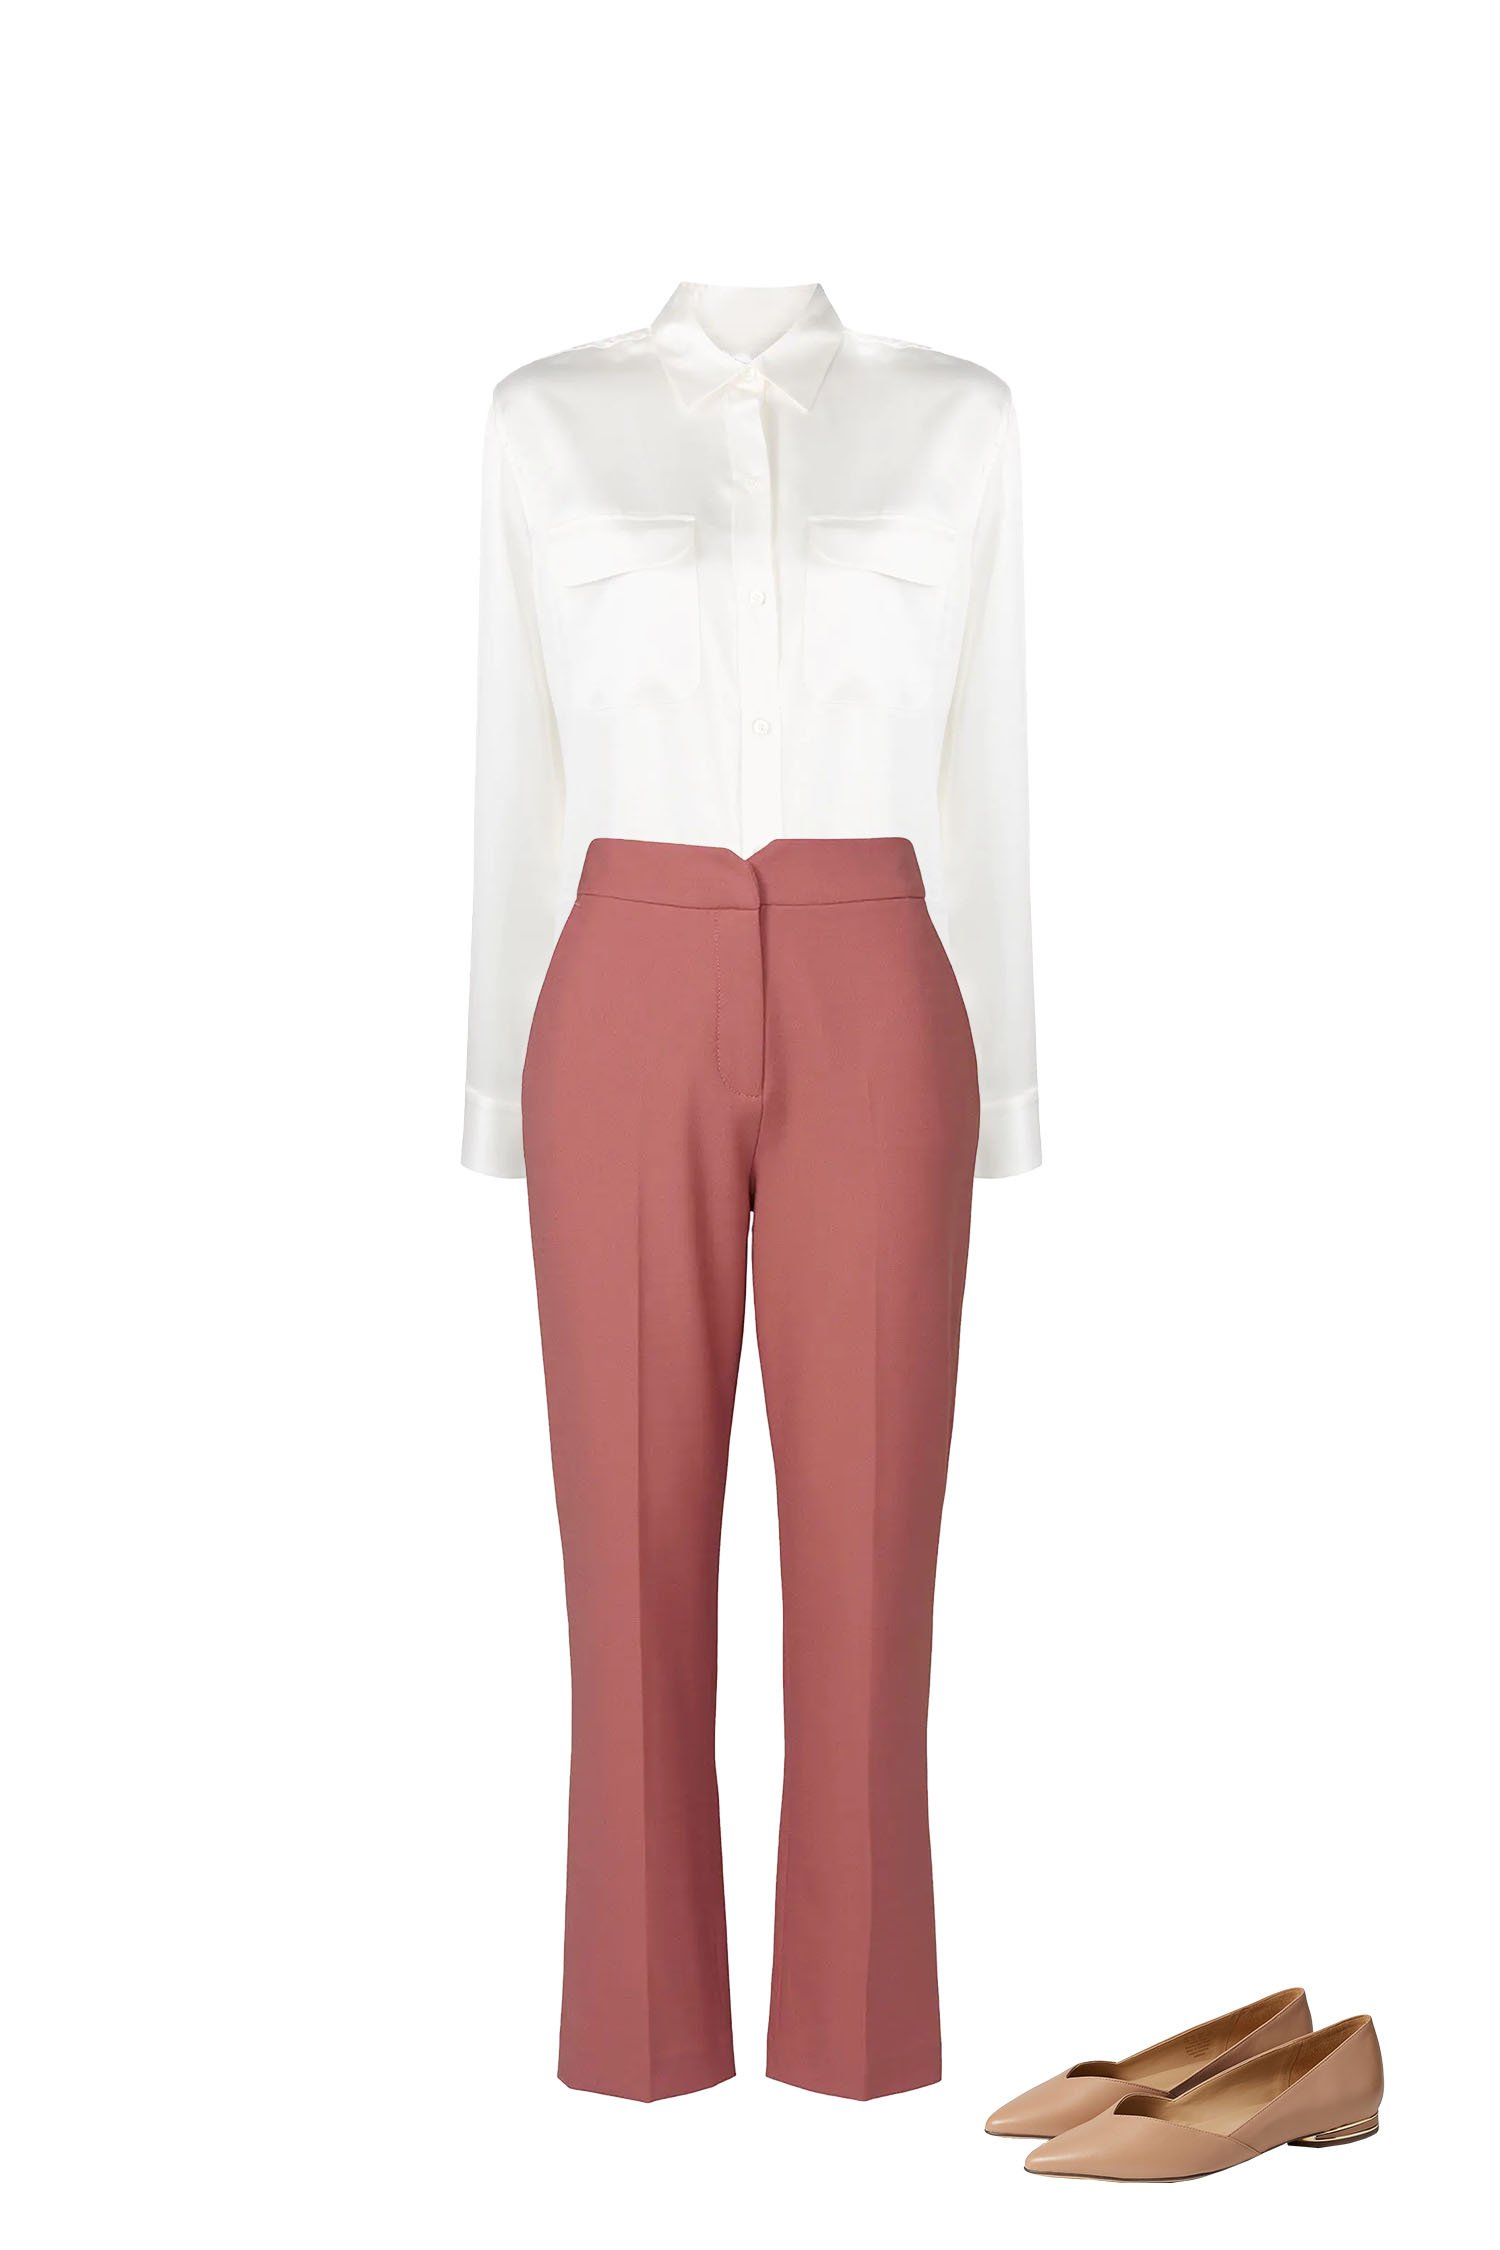 Rose Pink Ankle Pants with White Satin Shirt and Nude Pointy Toe Flats